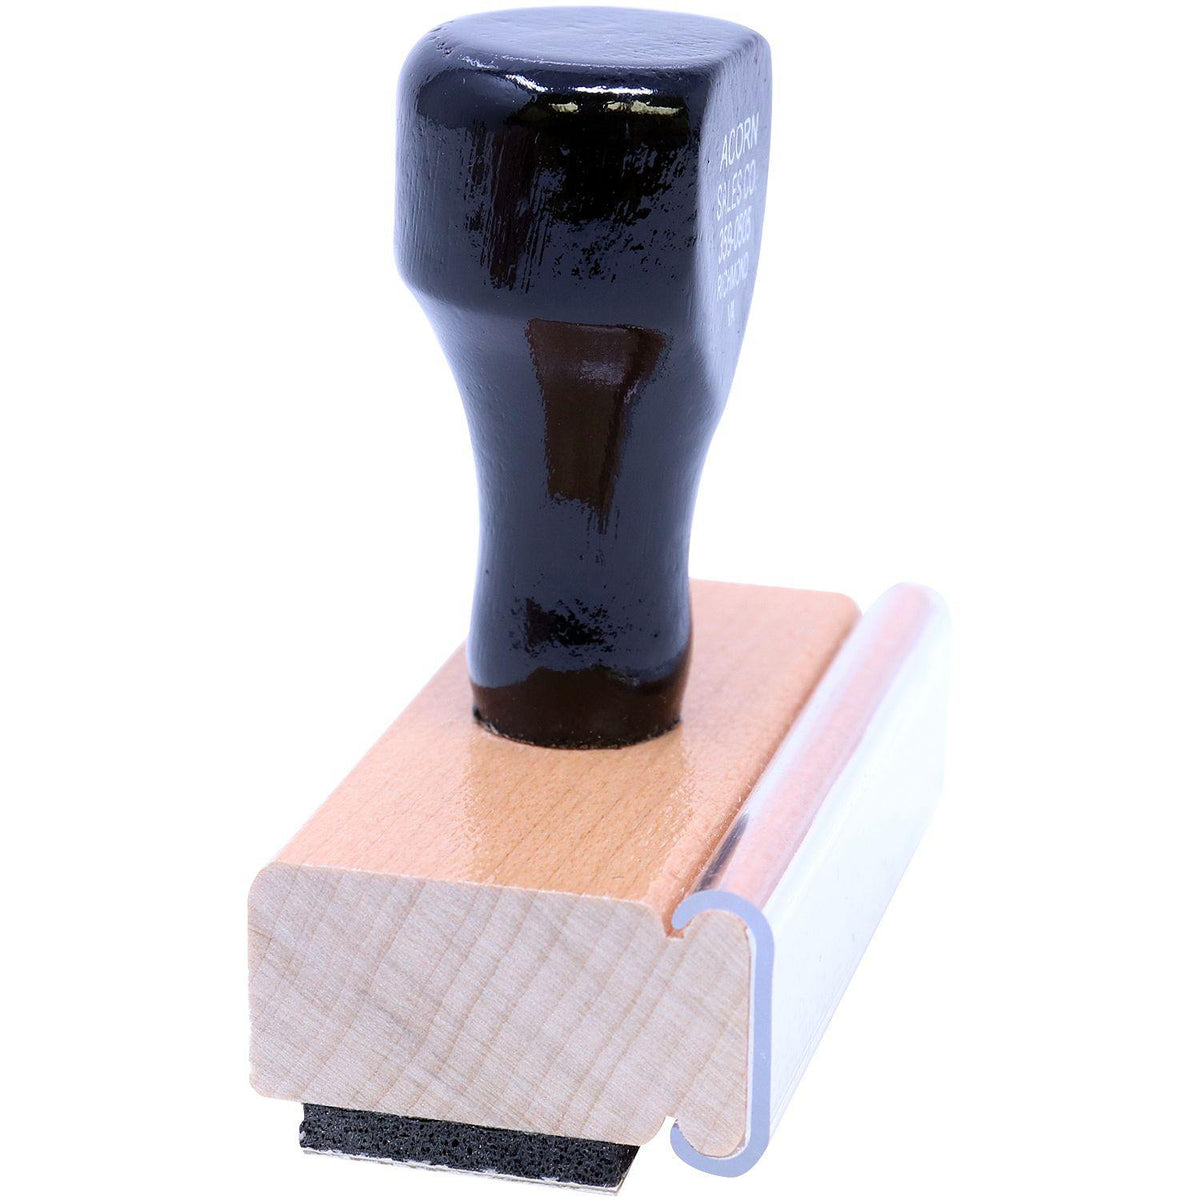 Side View of E Mailed Rubber Stamp at an Angle